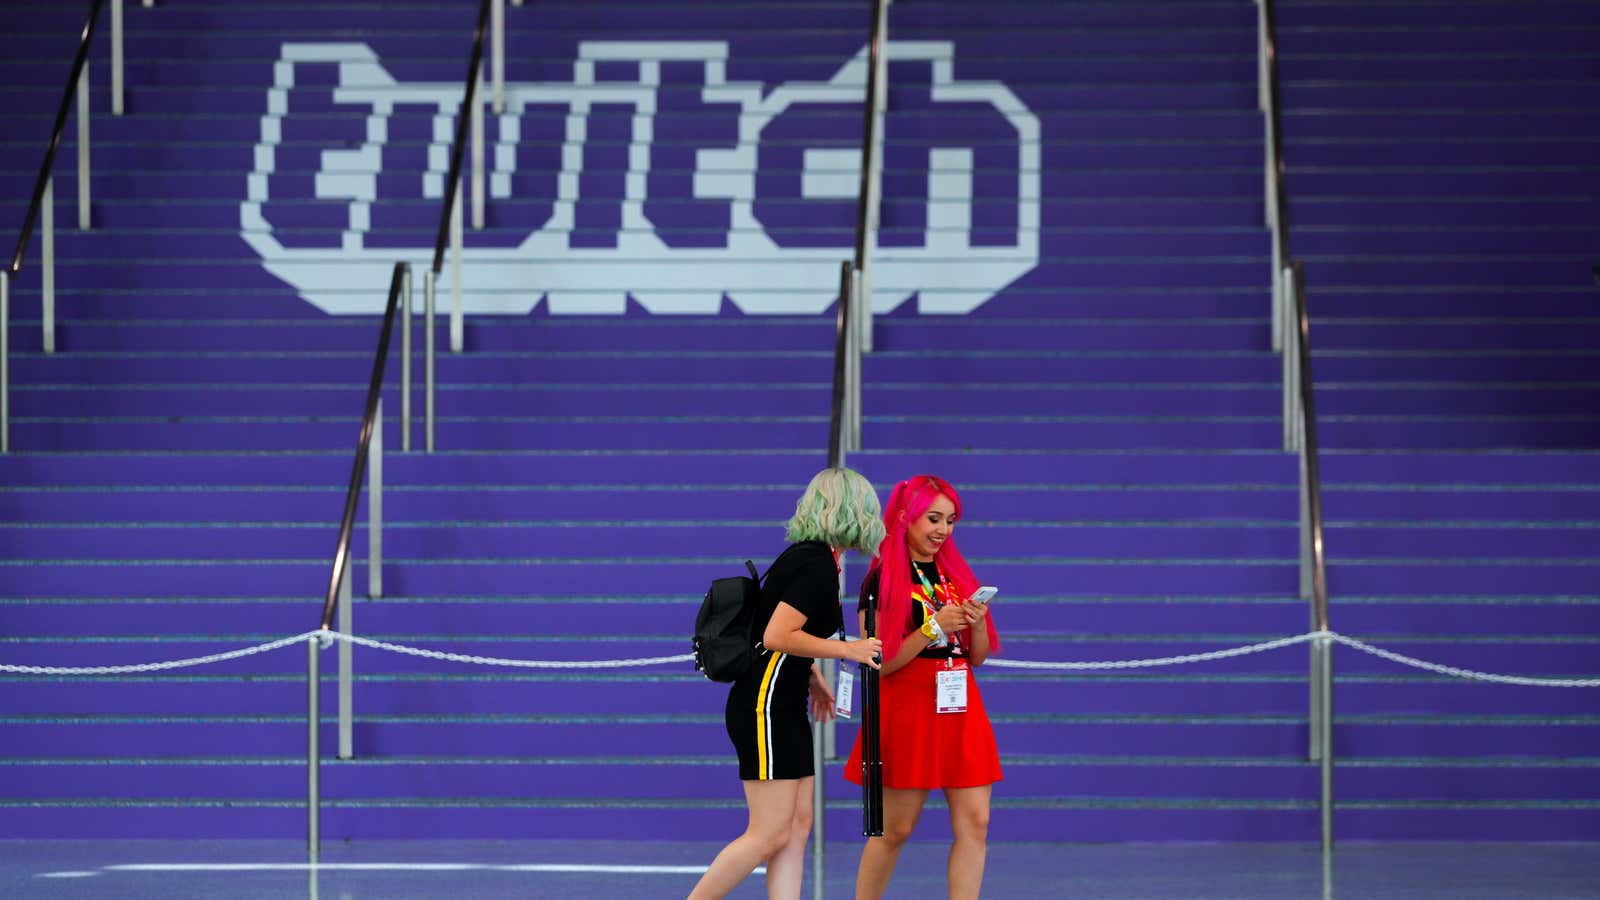 Rebrands Twitch Prime, No Longer Requires Twitch Account To